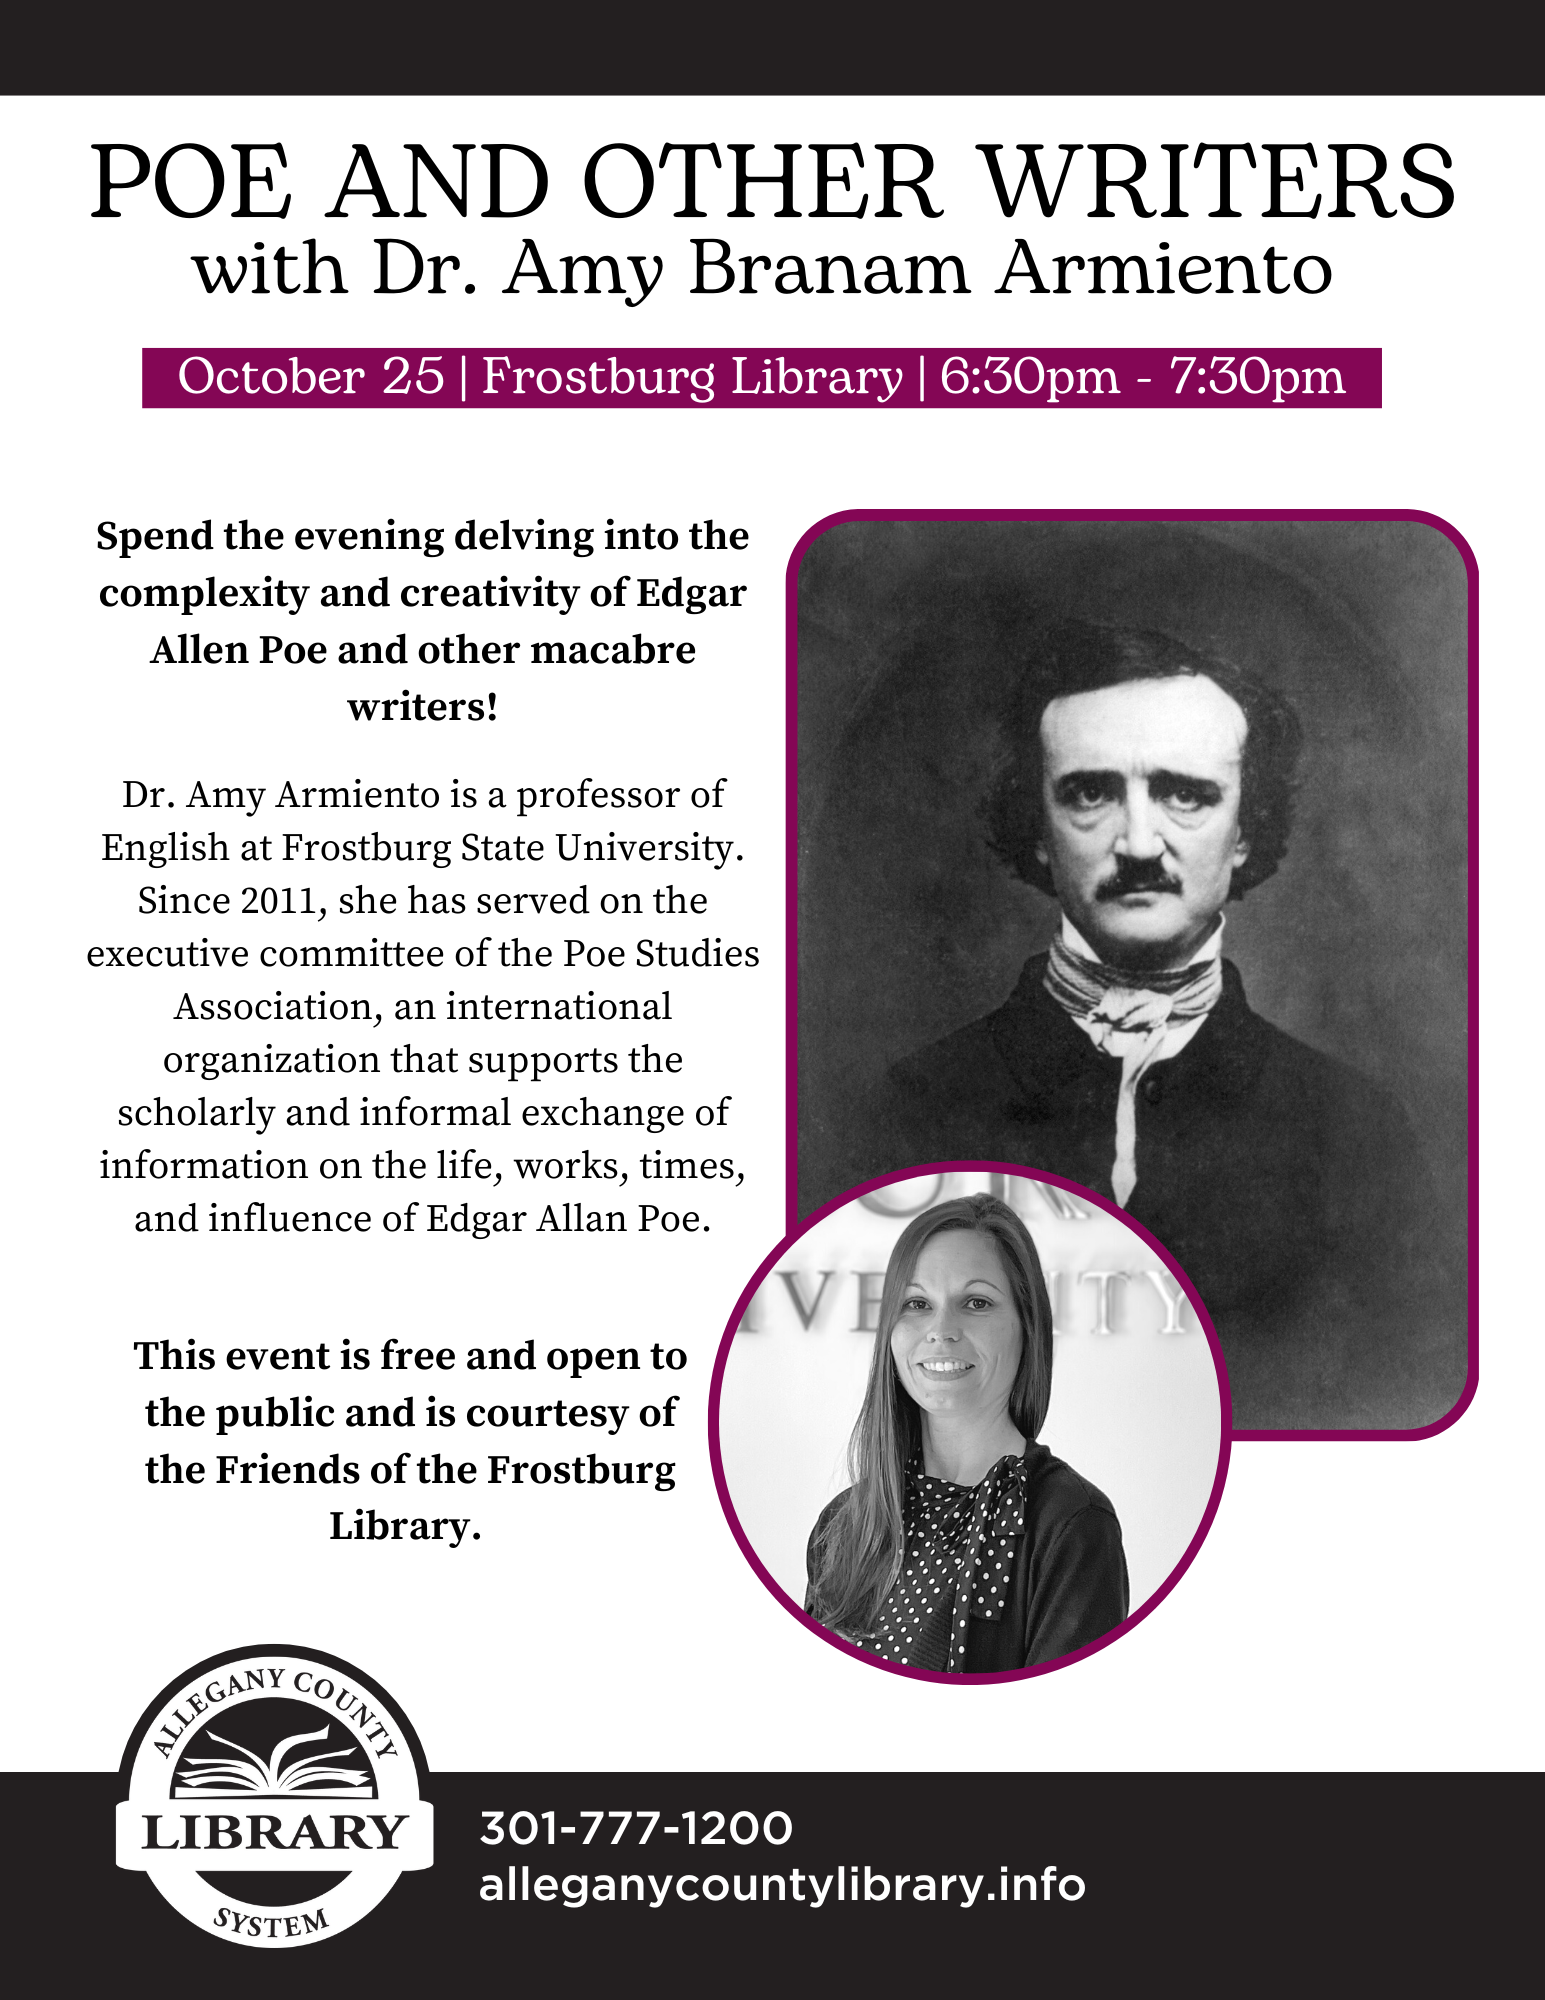 poe and other writers event details with a picture of Edgar Allen Poe and Dr. Armiento